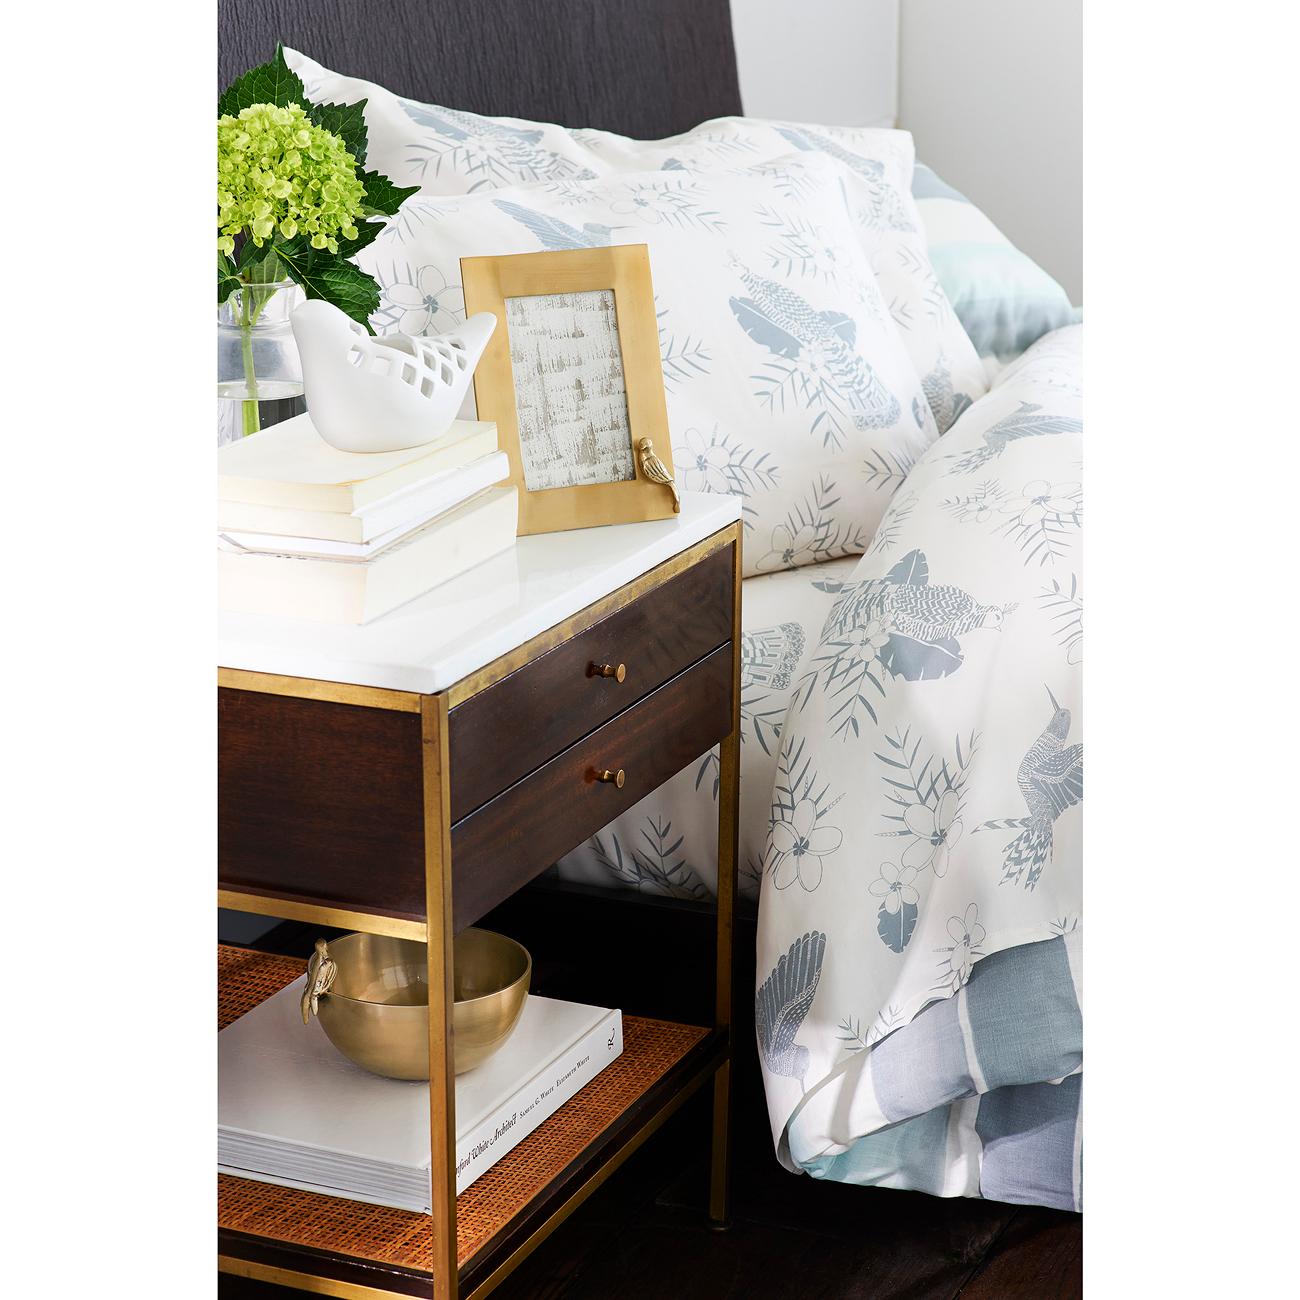 designer nate berkus his roots vintage style and target home collection birds accent table features number avian themed pieces including bird tealight holder frame sheet set bowl